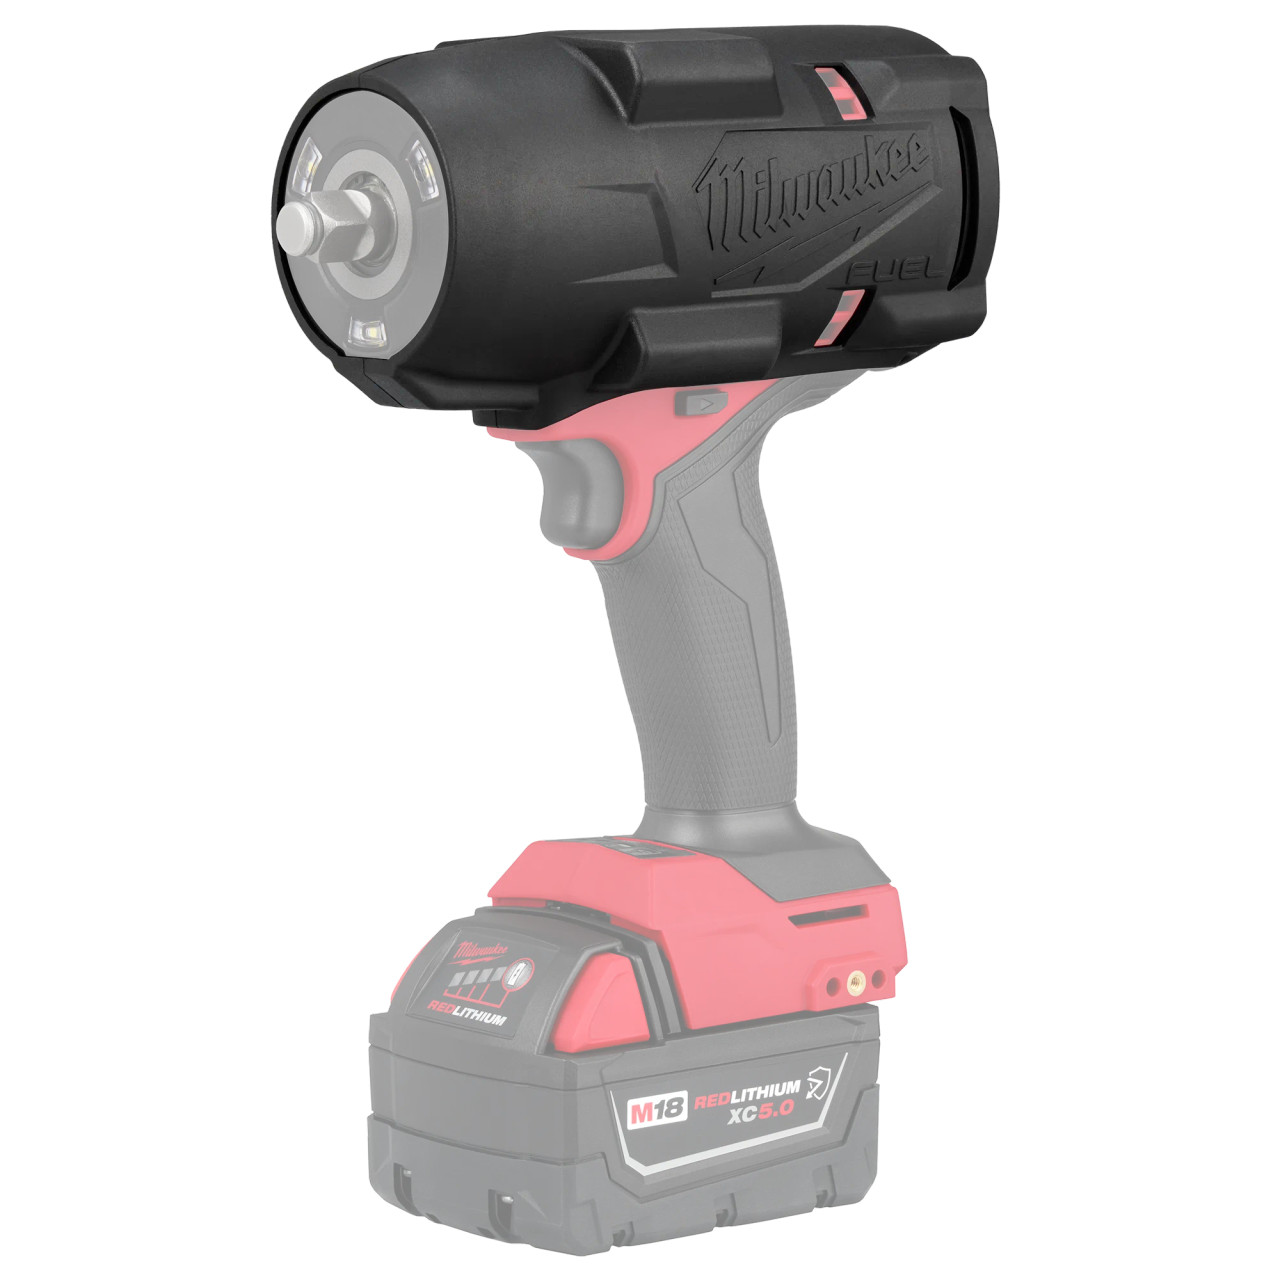 Milwaukee M18 2-Speed 1/4 Right Angle Impact Driver (Bare) 